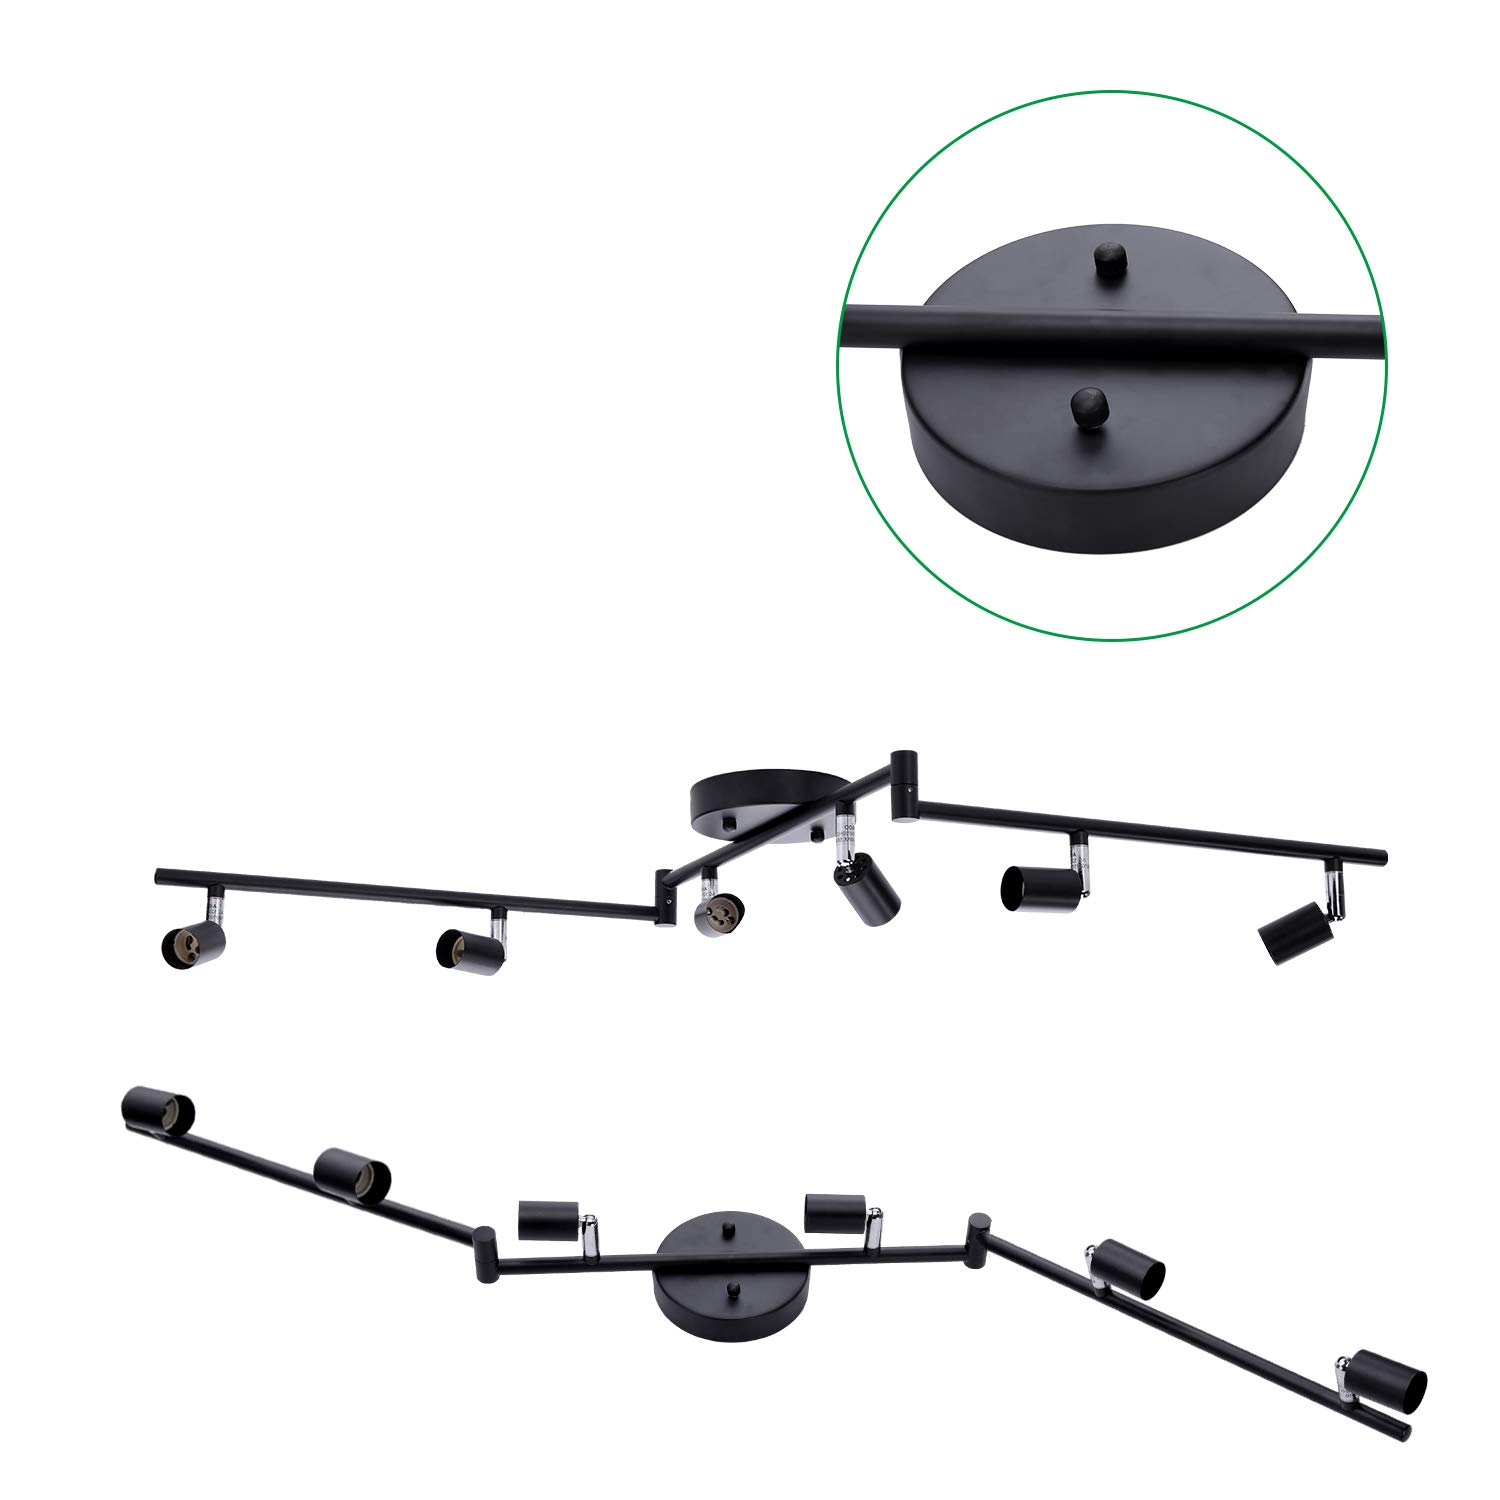 AIBOO 6-Light Adjustable Dimmable Track Lighting Kit, Flexible Foldable Arms, Matt Black Color Perfect for Kitchen,Hallyway Bed Room Lighting Fixture, GU10 Base Bulbs not Included